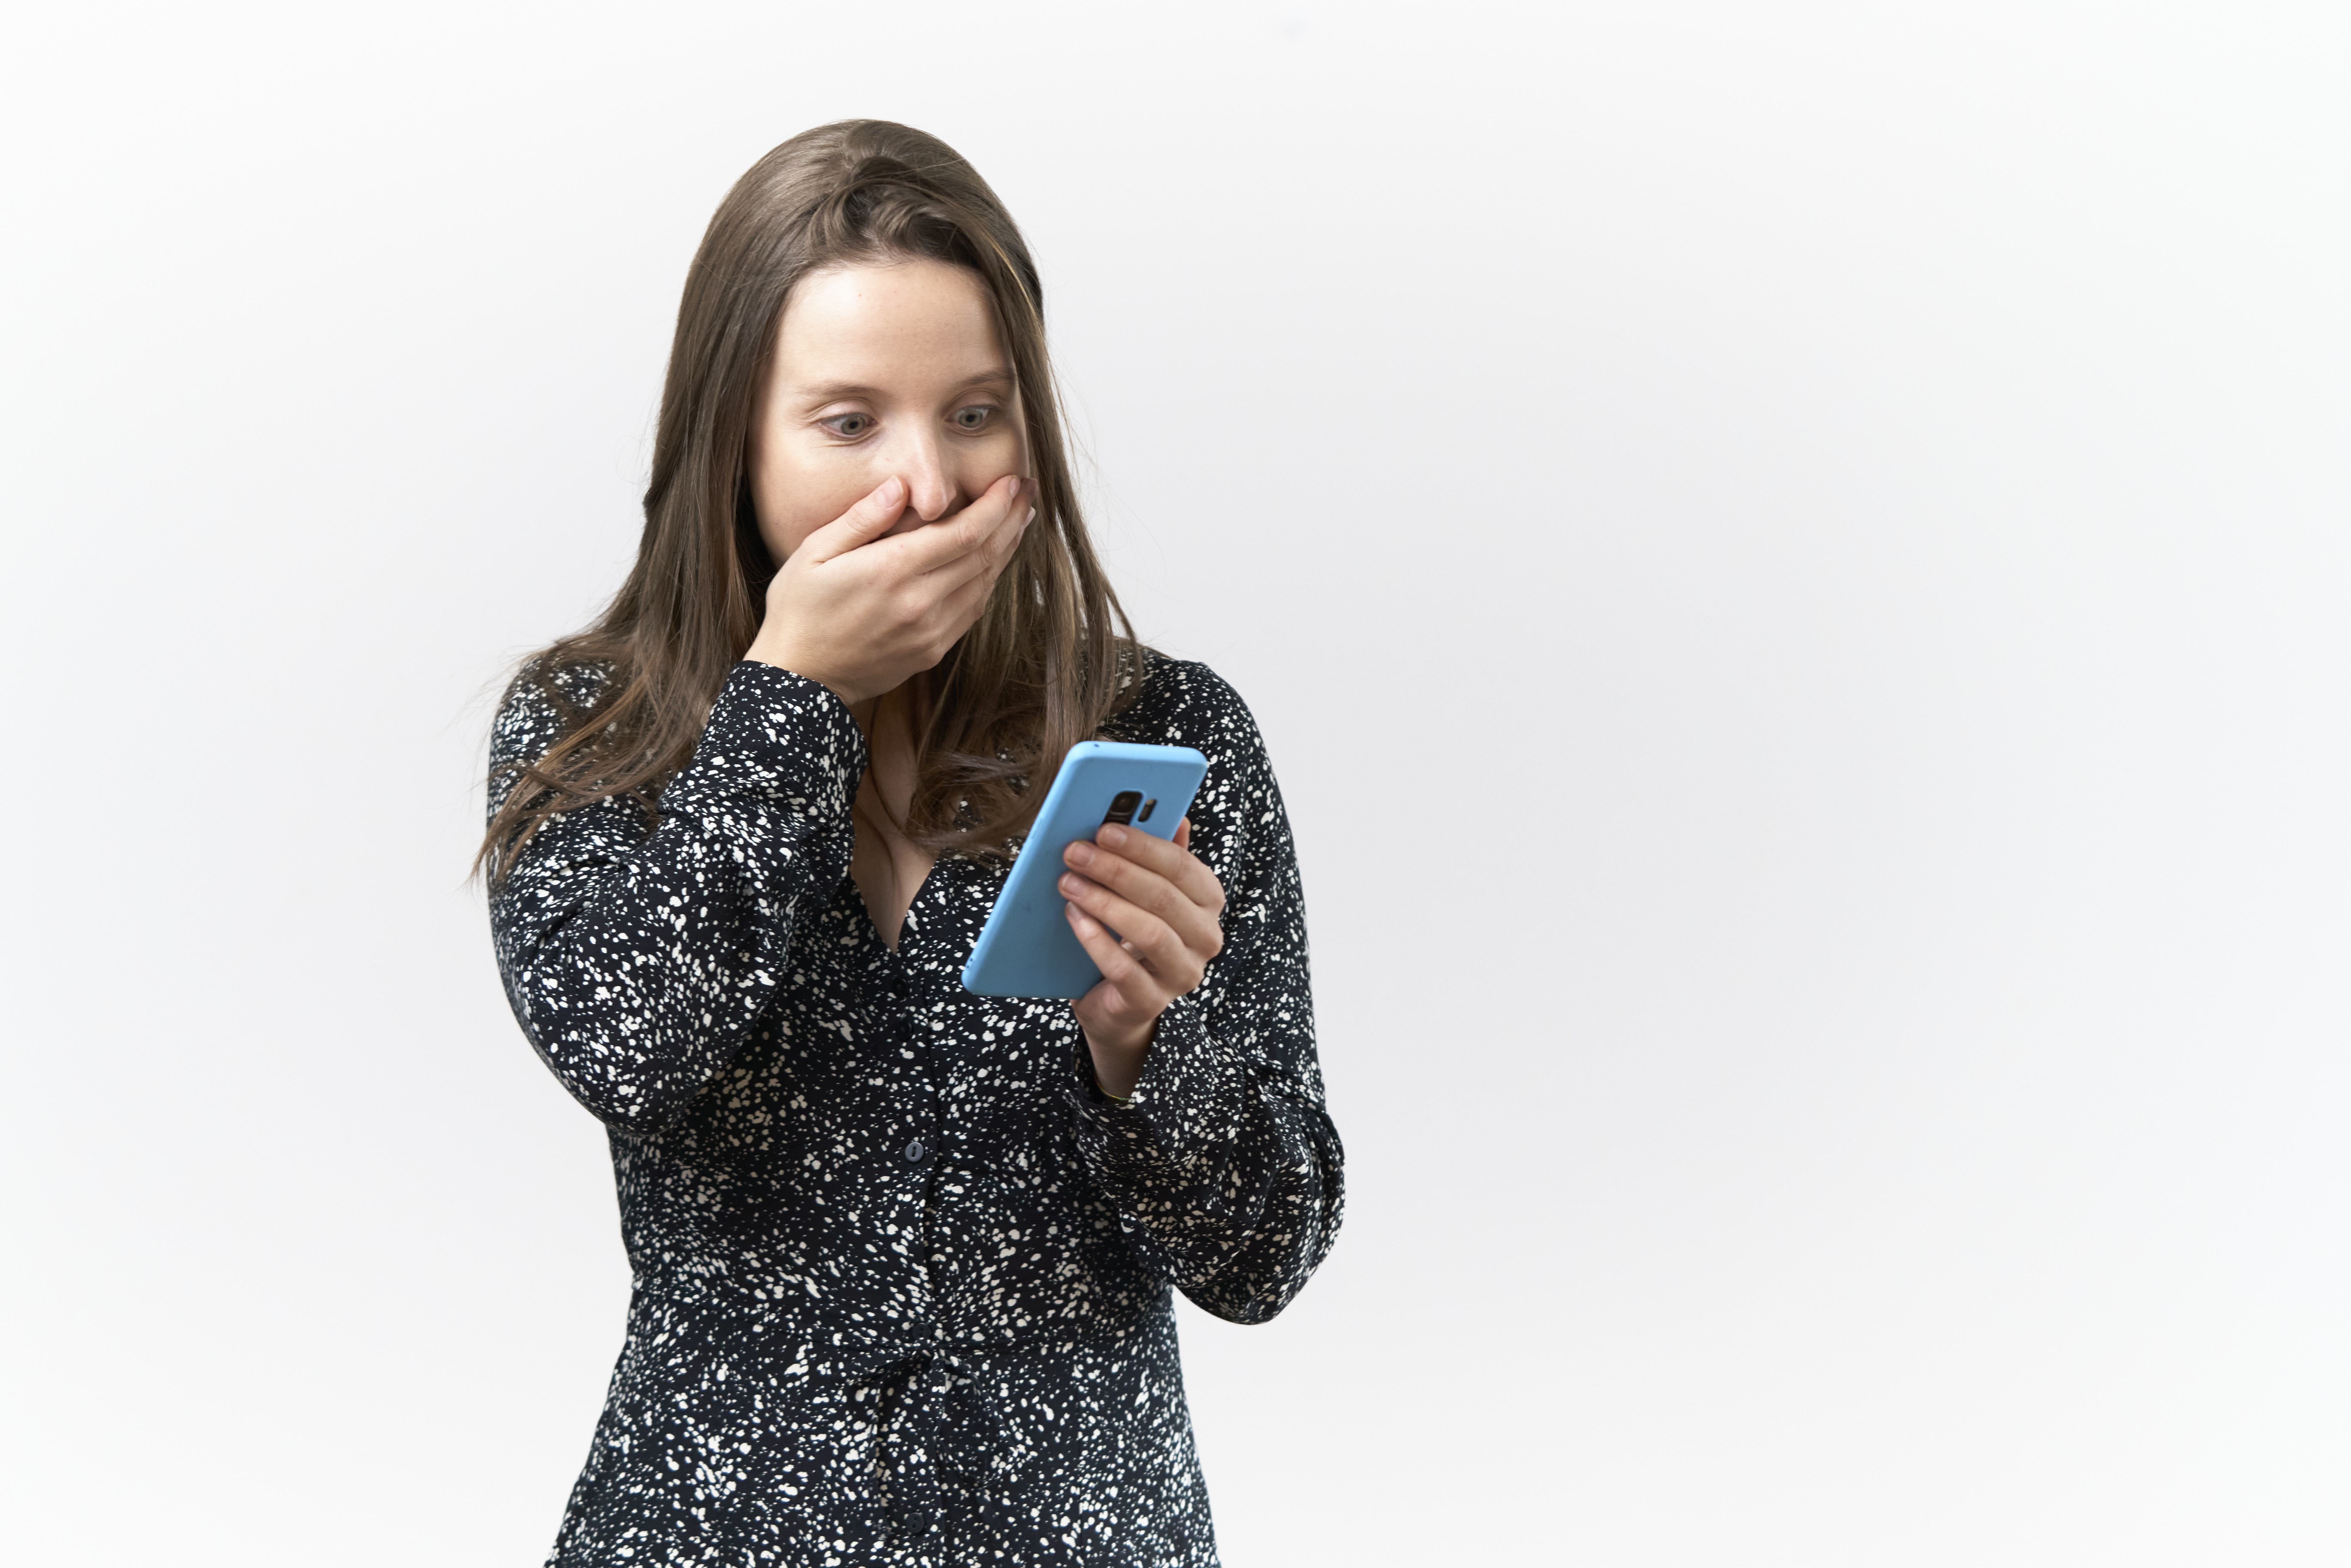 Young woman with surprised expression reading messages on cell phone against white background | Source: Getty Images